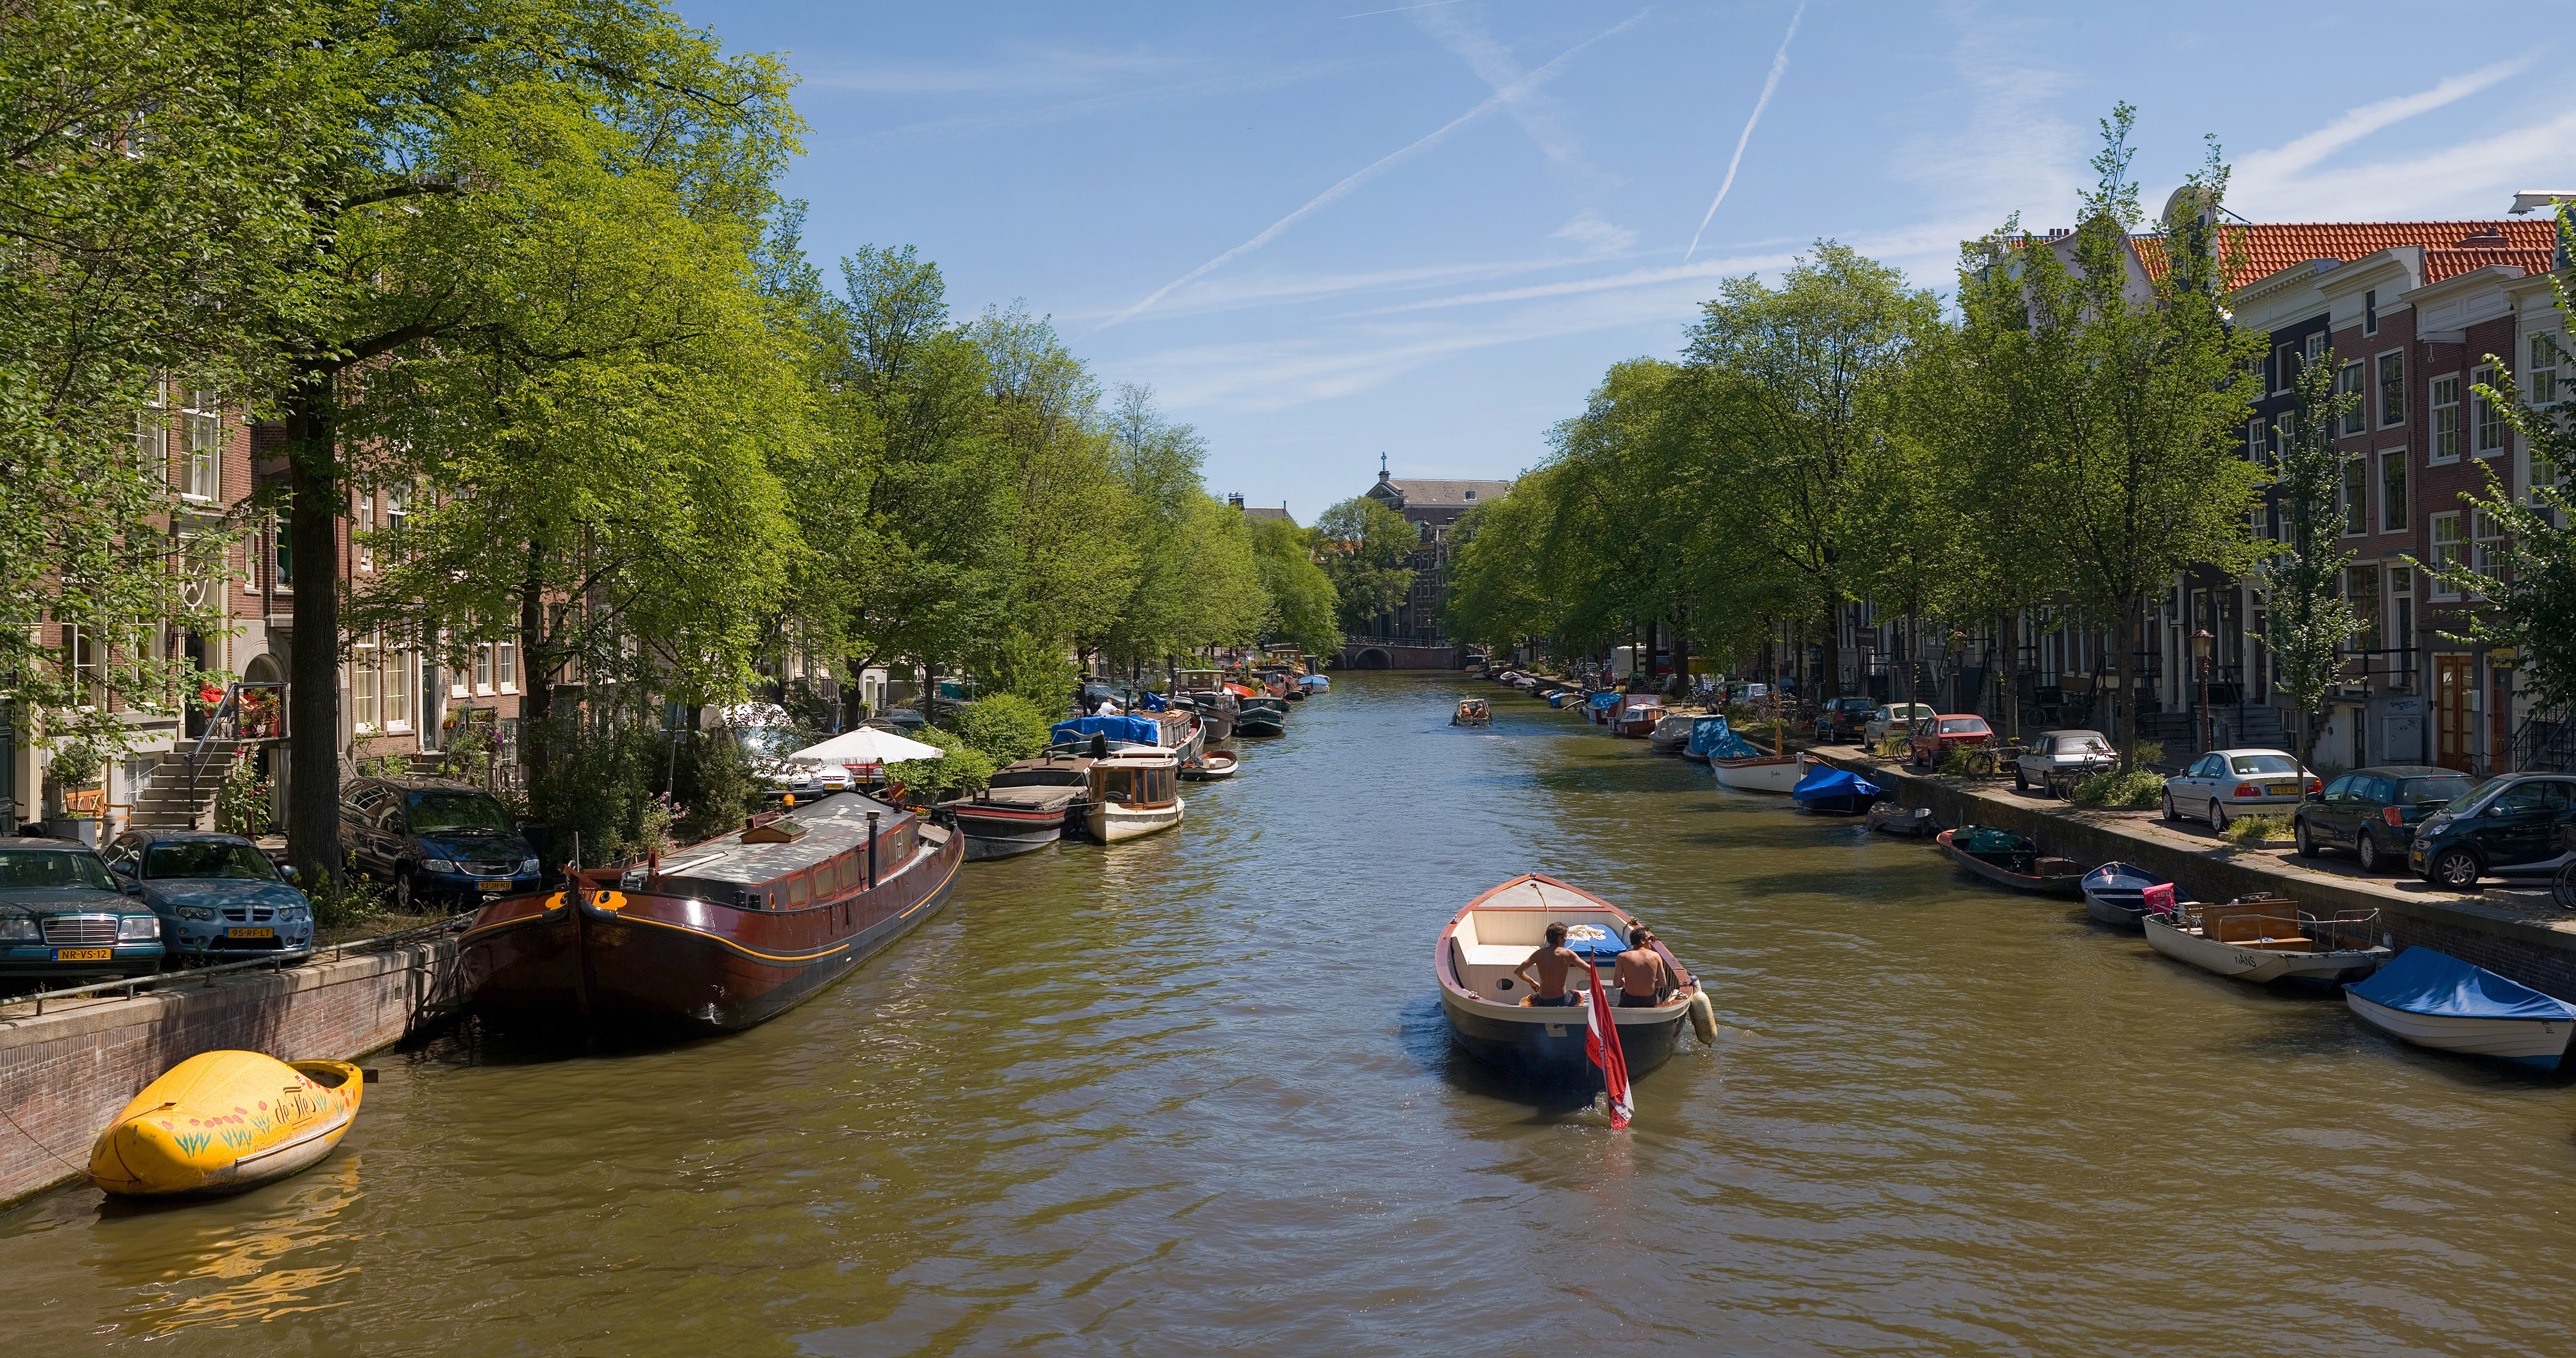 Canals of Amsterdam - Wikipedia